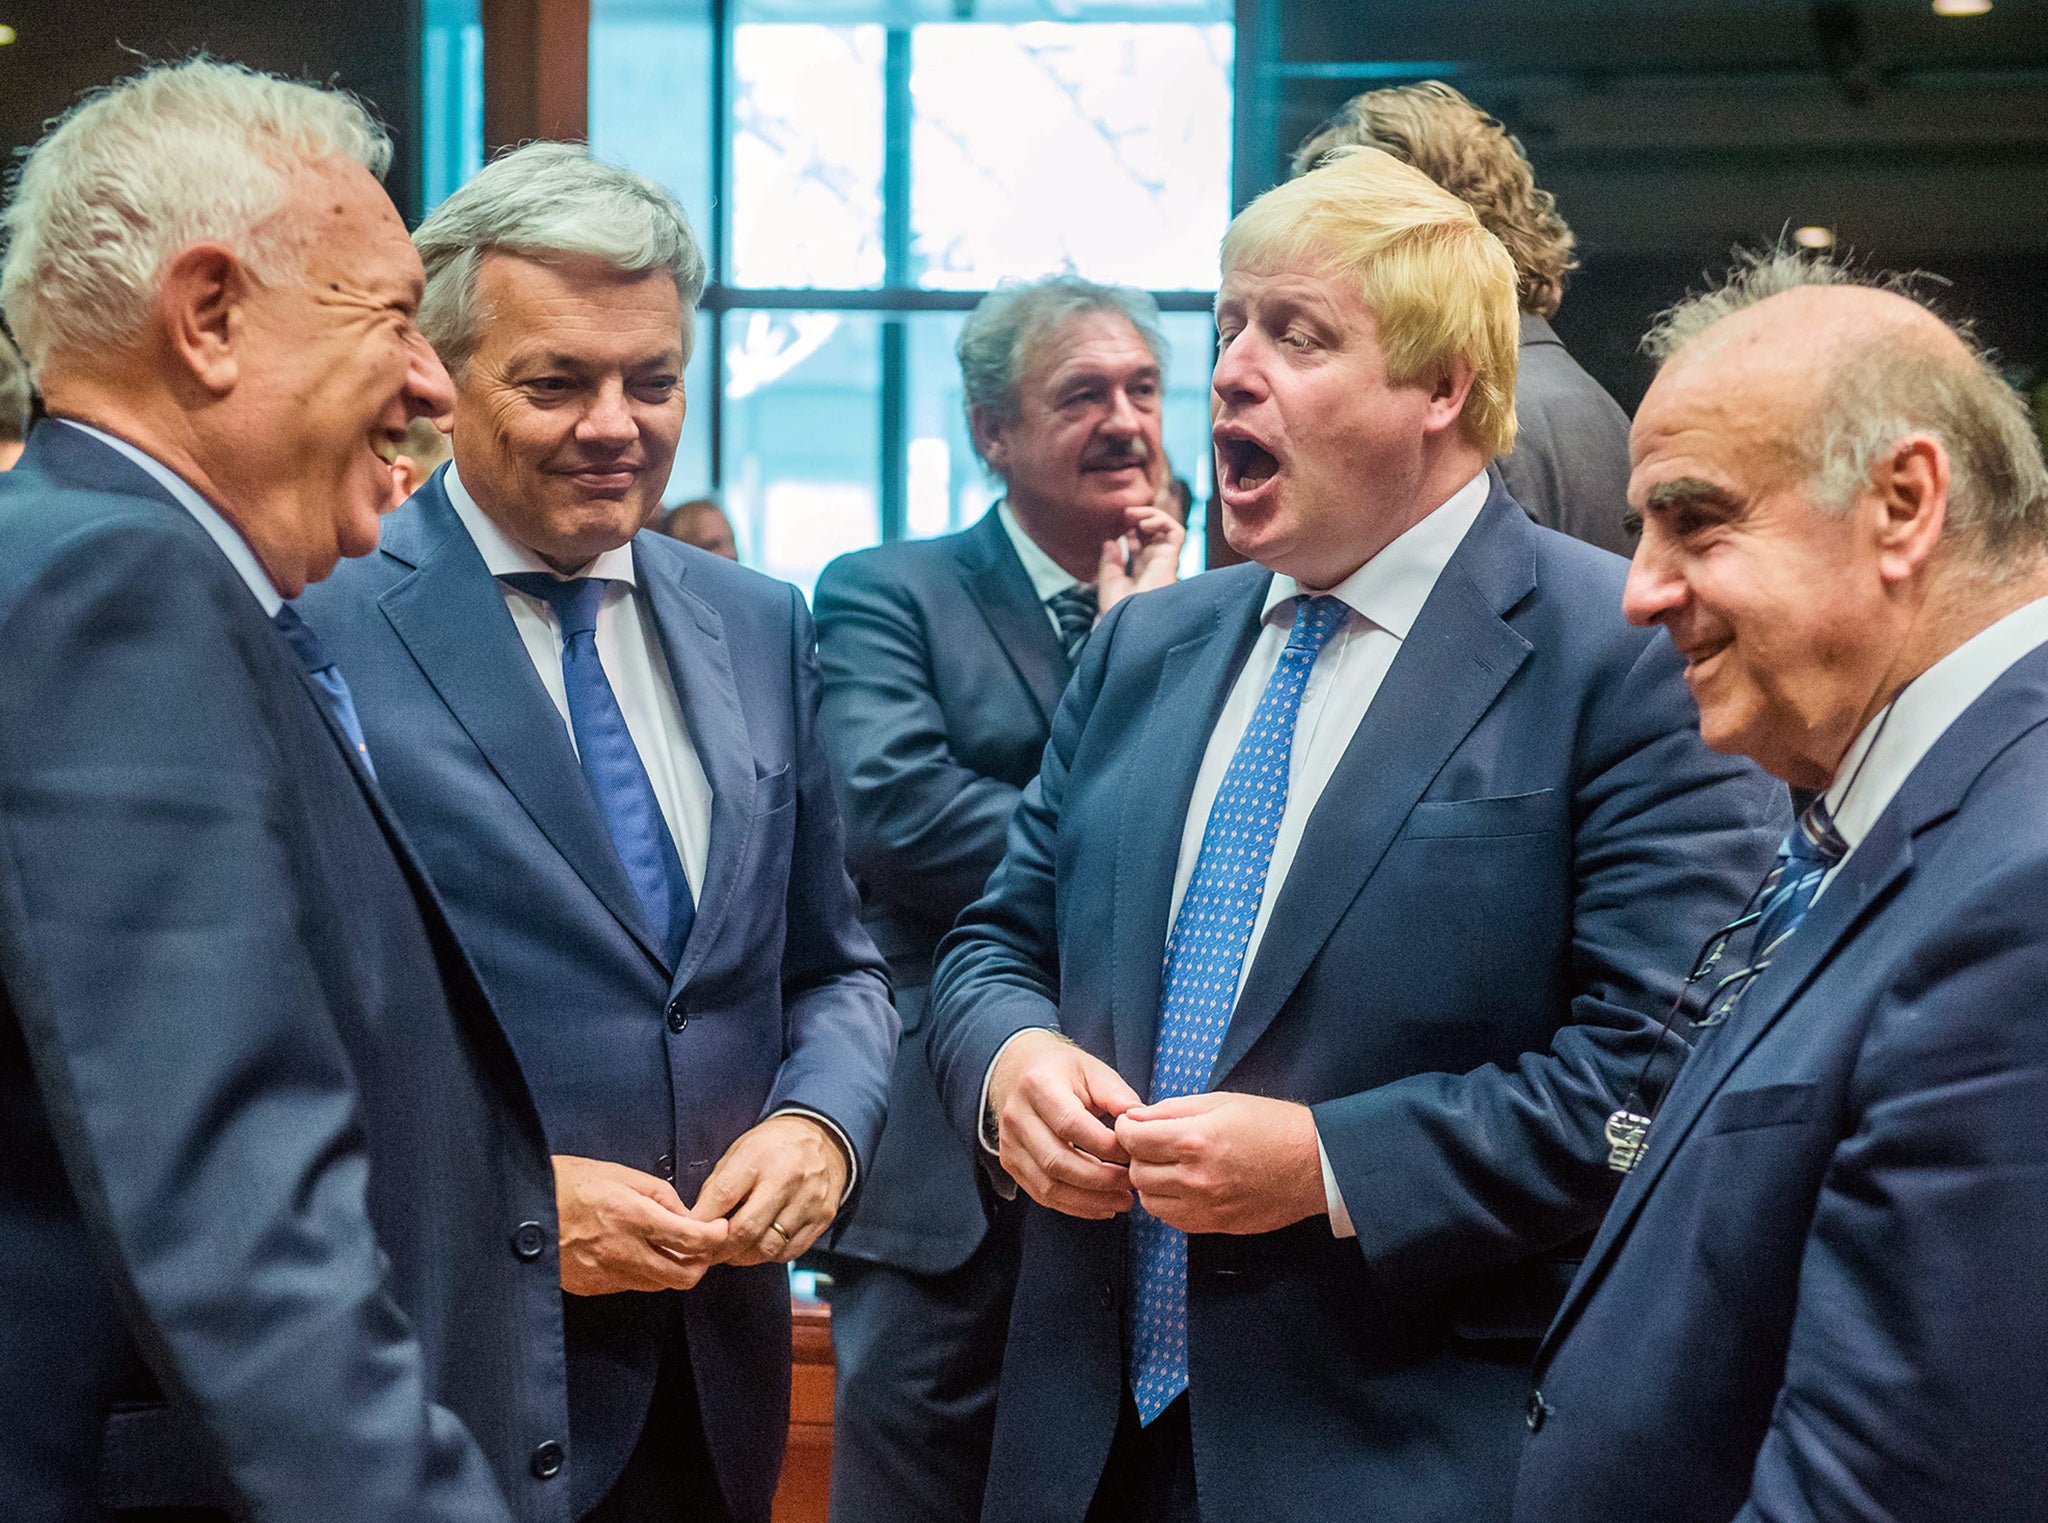 (L-R) Spanish Foreign Minister Jose Manuel Garcia-Margallo, Belgian Foreign Minister Didier Reynders, British Foreign Secretary Boris Johnson and Maltese Foreign Minister George Vella talk during an EU Foreign Affairs Council